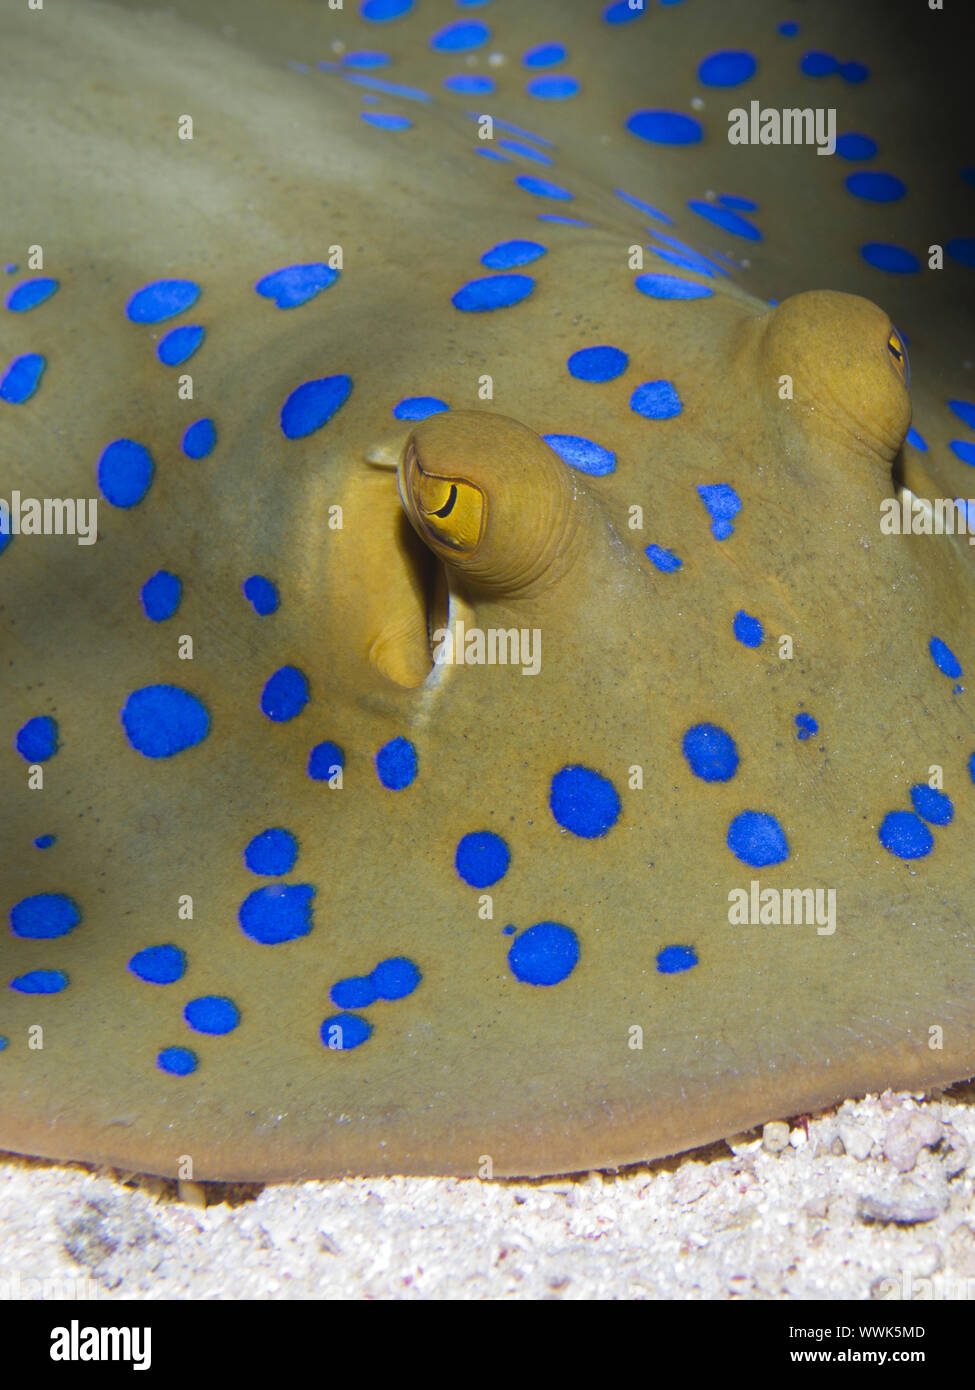 Bluespotted ribbontail ray Foto Stock